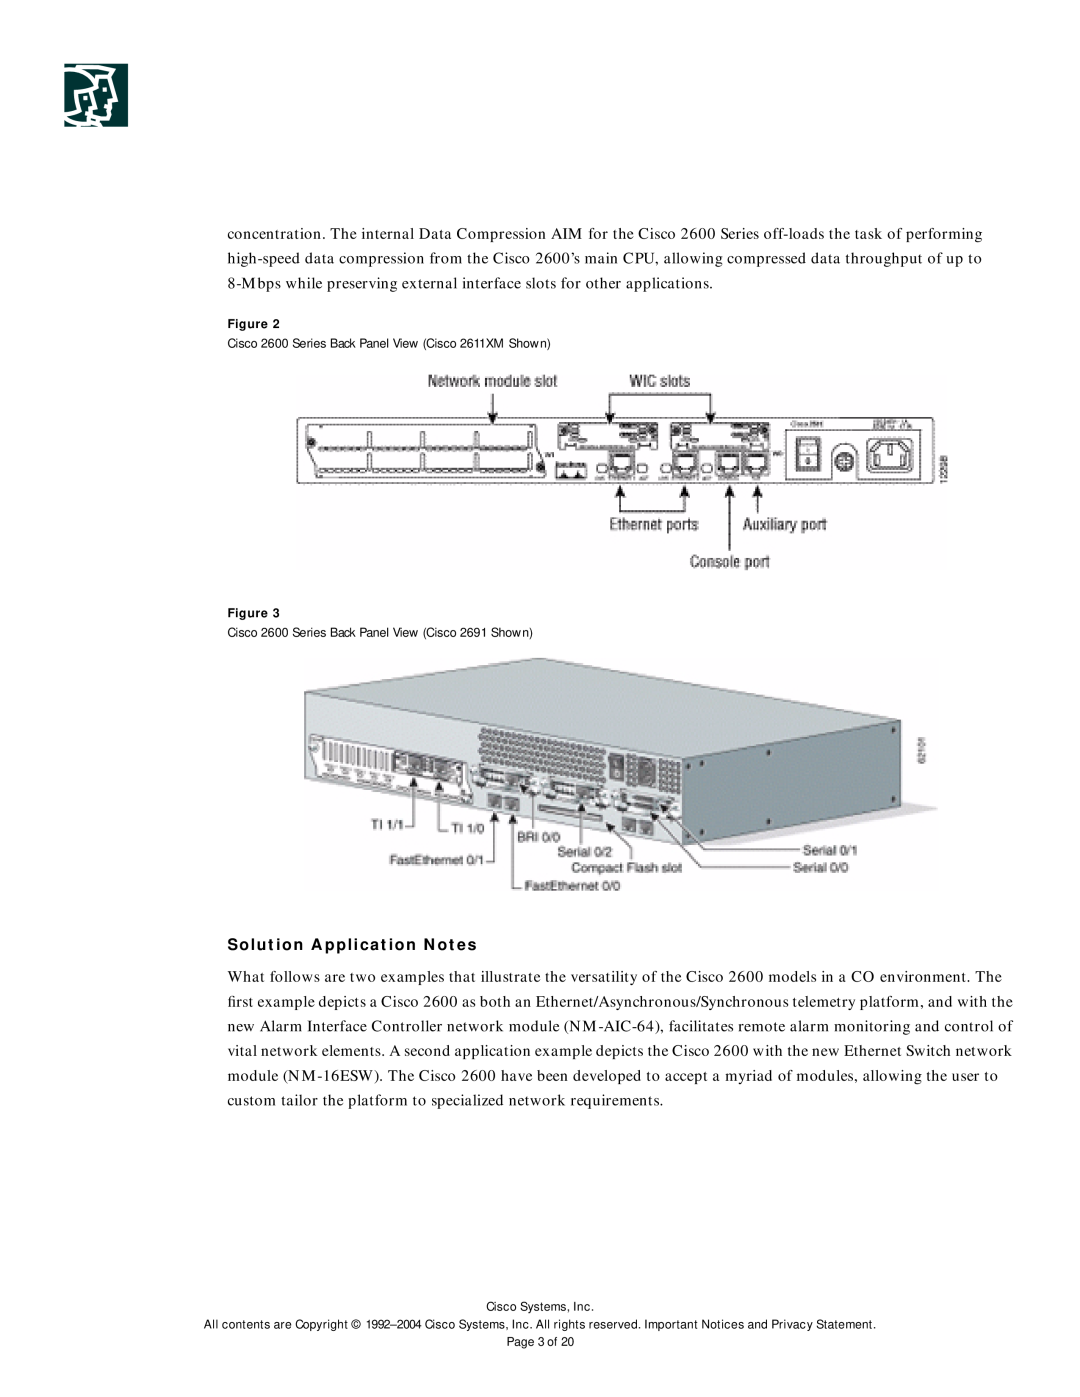 Cisco Systems 2600-DC Series manual Solution Application Notes, Cisco 2600 Series Back Panel View Cisco 2611XM Shown 